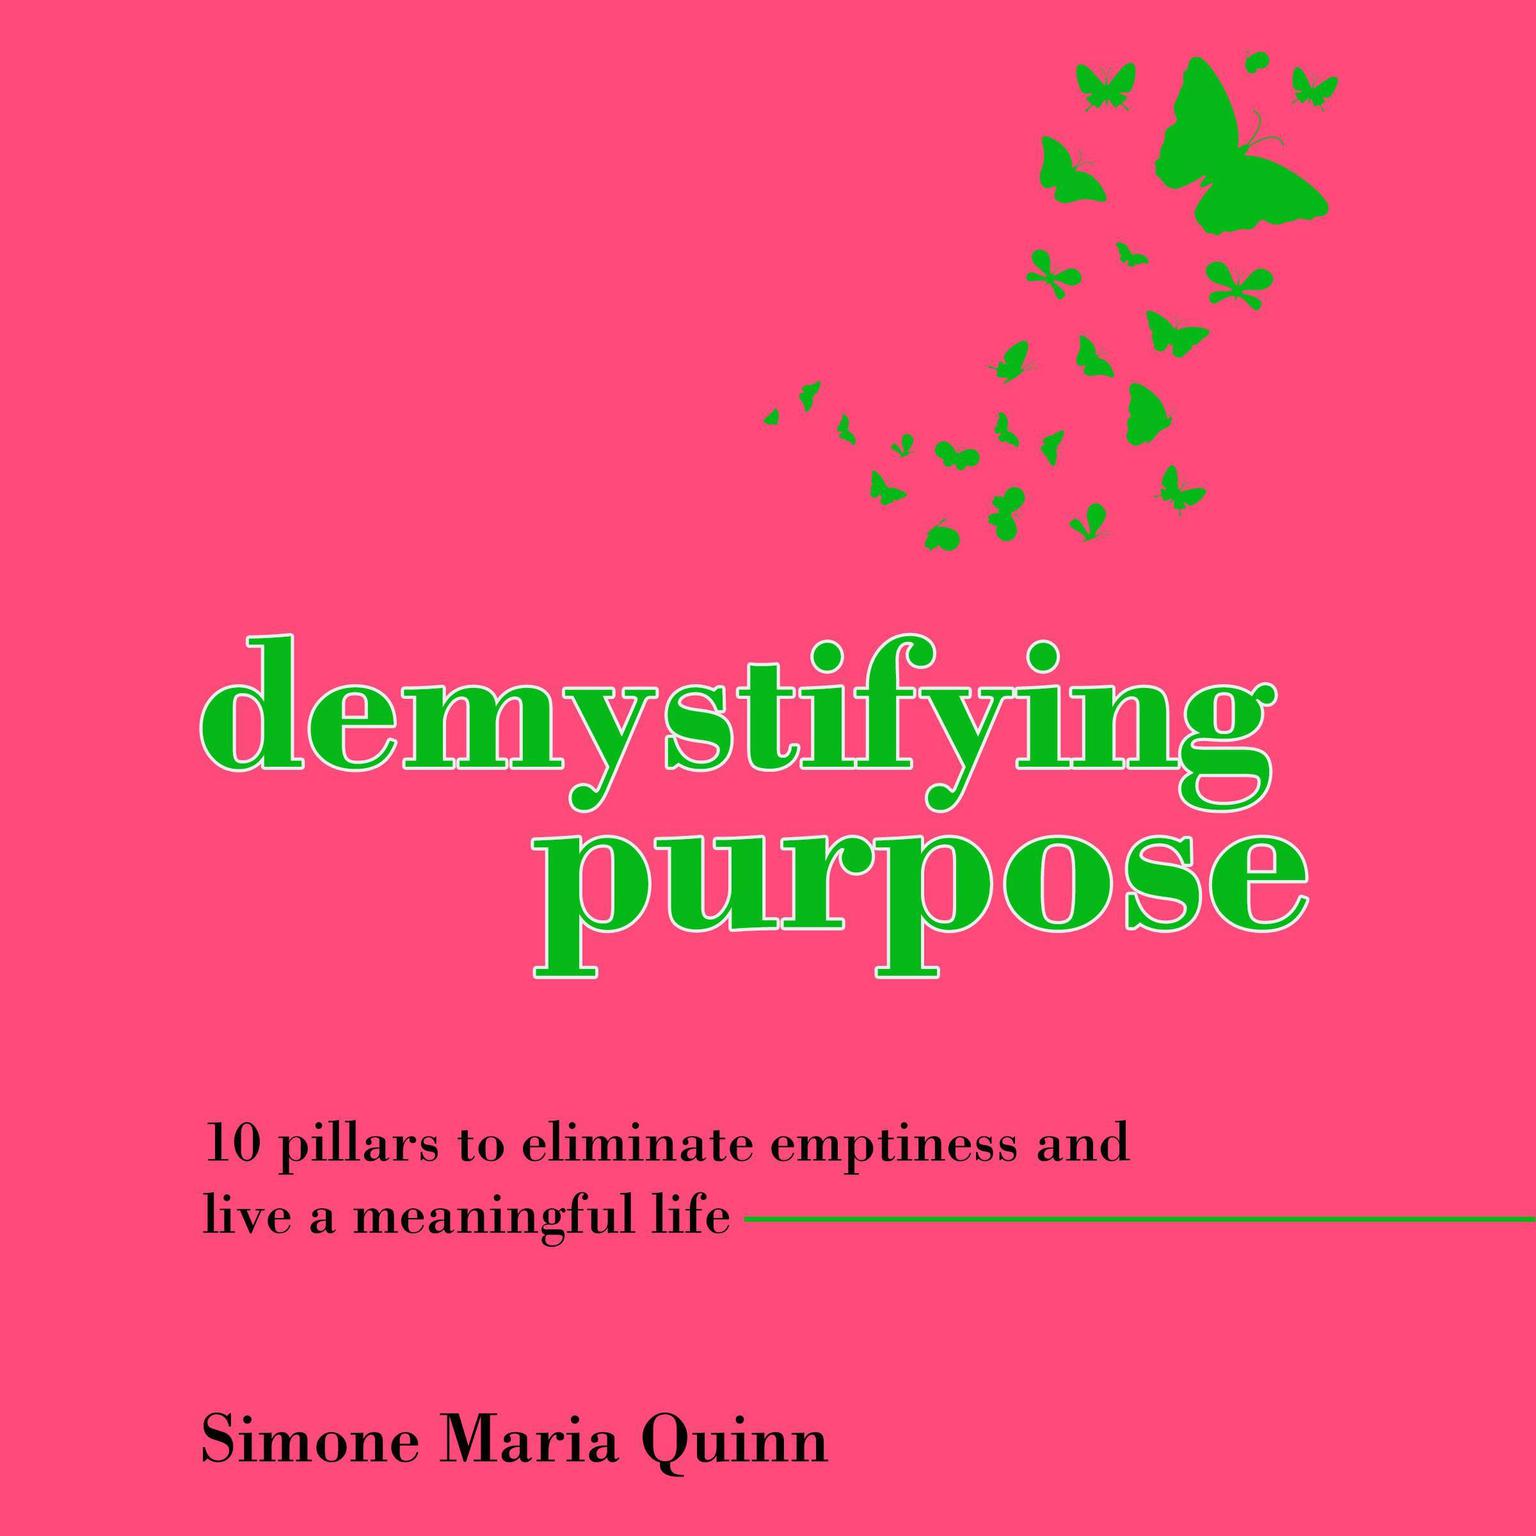 Demystifying Purpose: 10 pillars to eliminate emptiness and live a meaningful life Audiobook, by Simone Maria Quinn